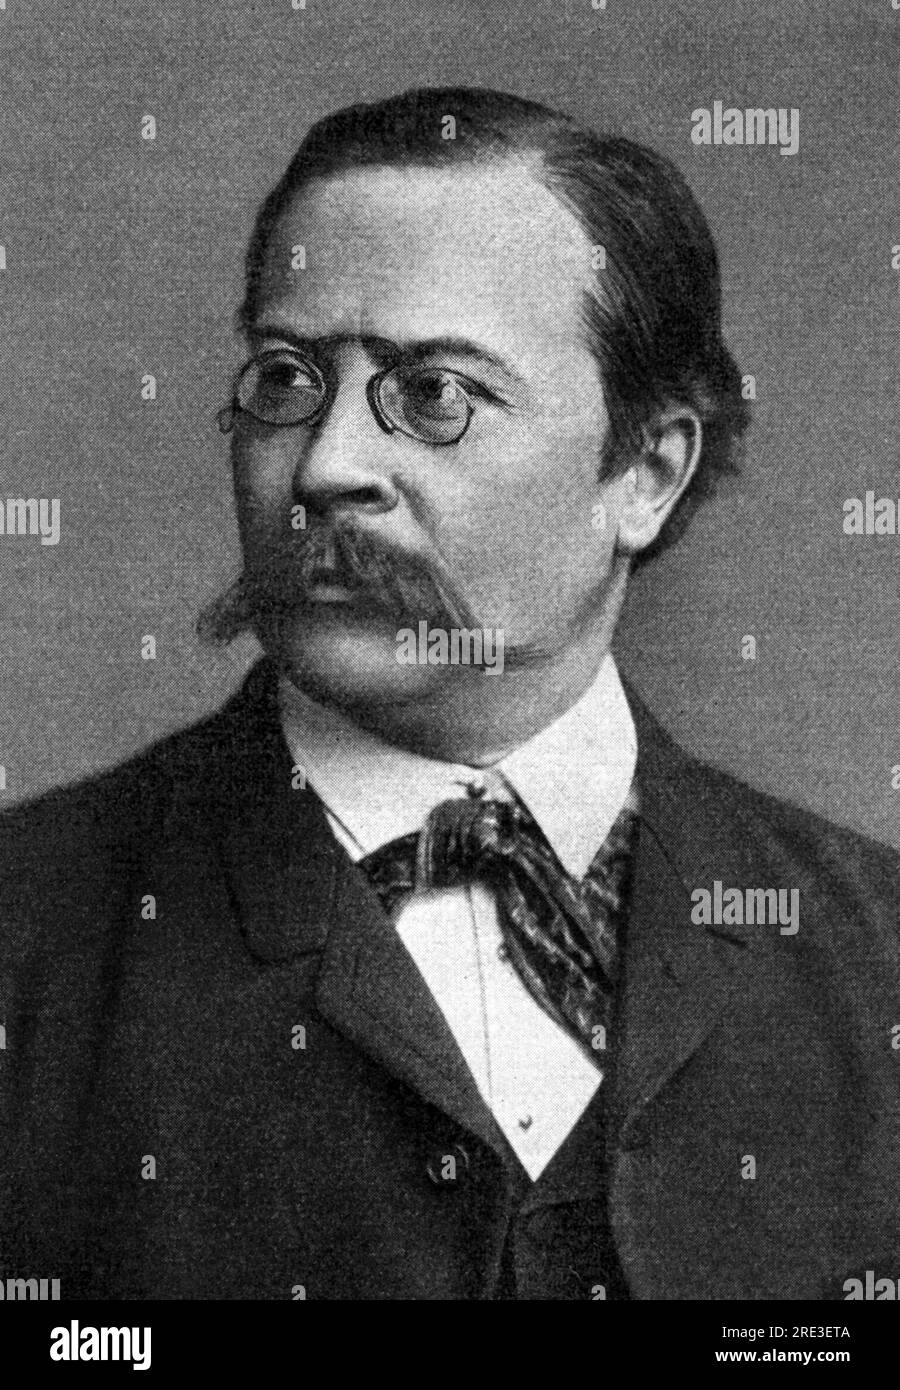 Wildenbruch, Ernst von, 3.2.1845 - 15.1.1909, German writer, print after photograph, 1889, ADDITIONAL-RIGHTS-CLEARANCE-INFO-NOT-AVAILABLE Stock Photo